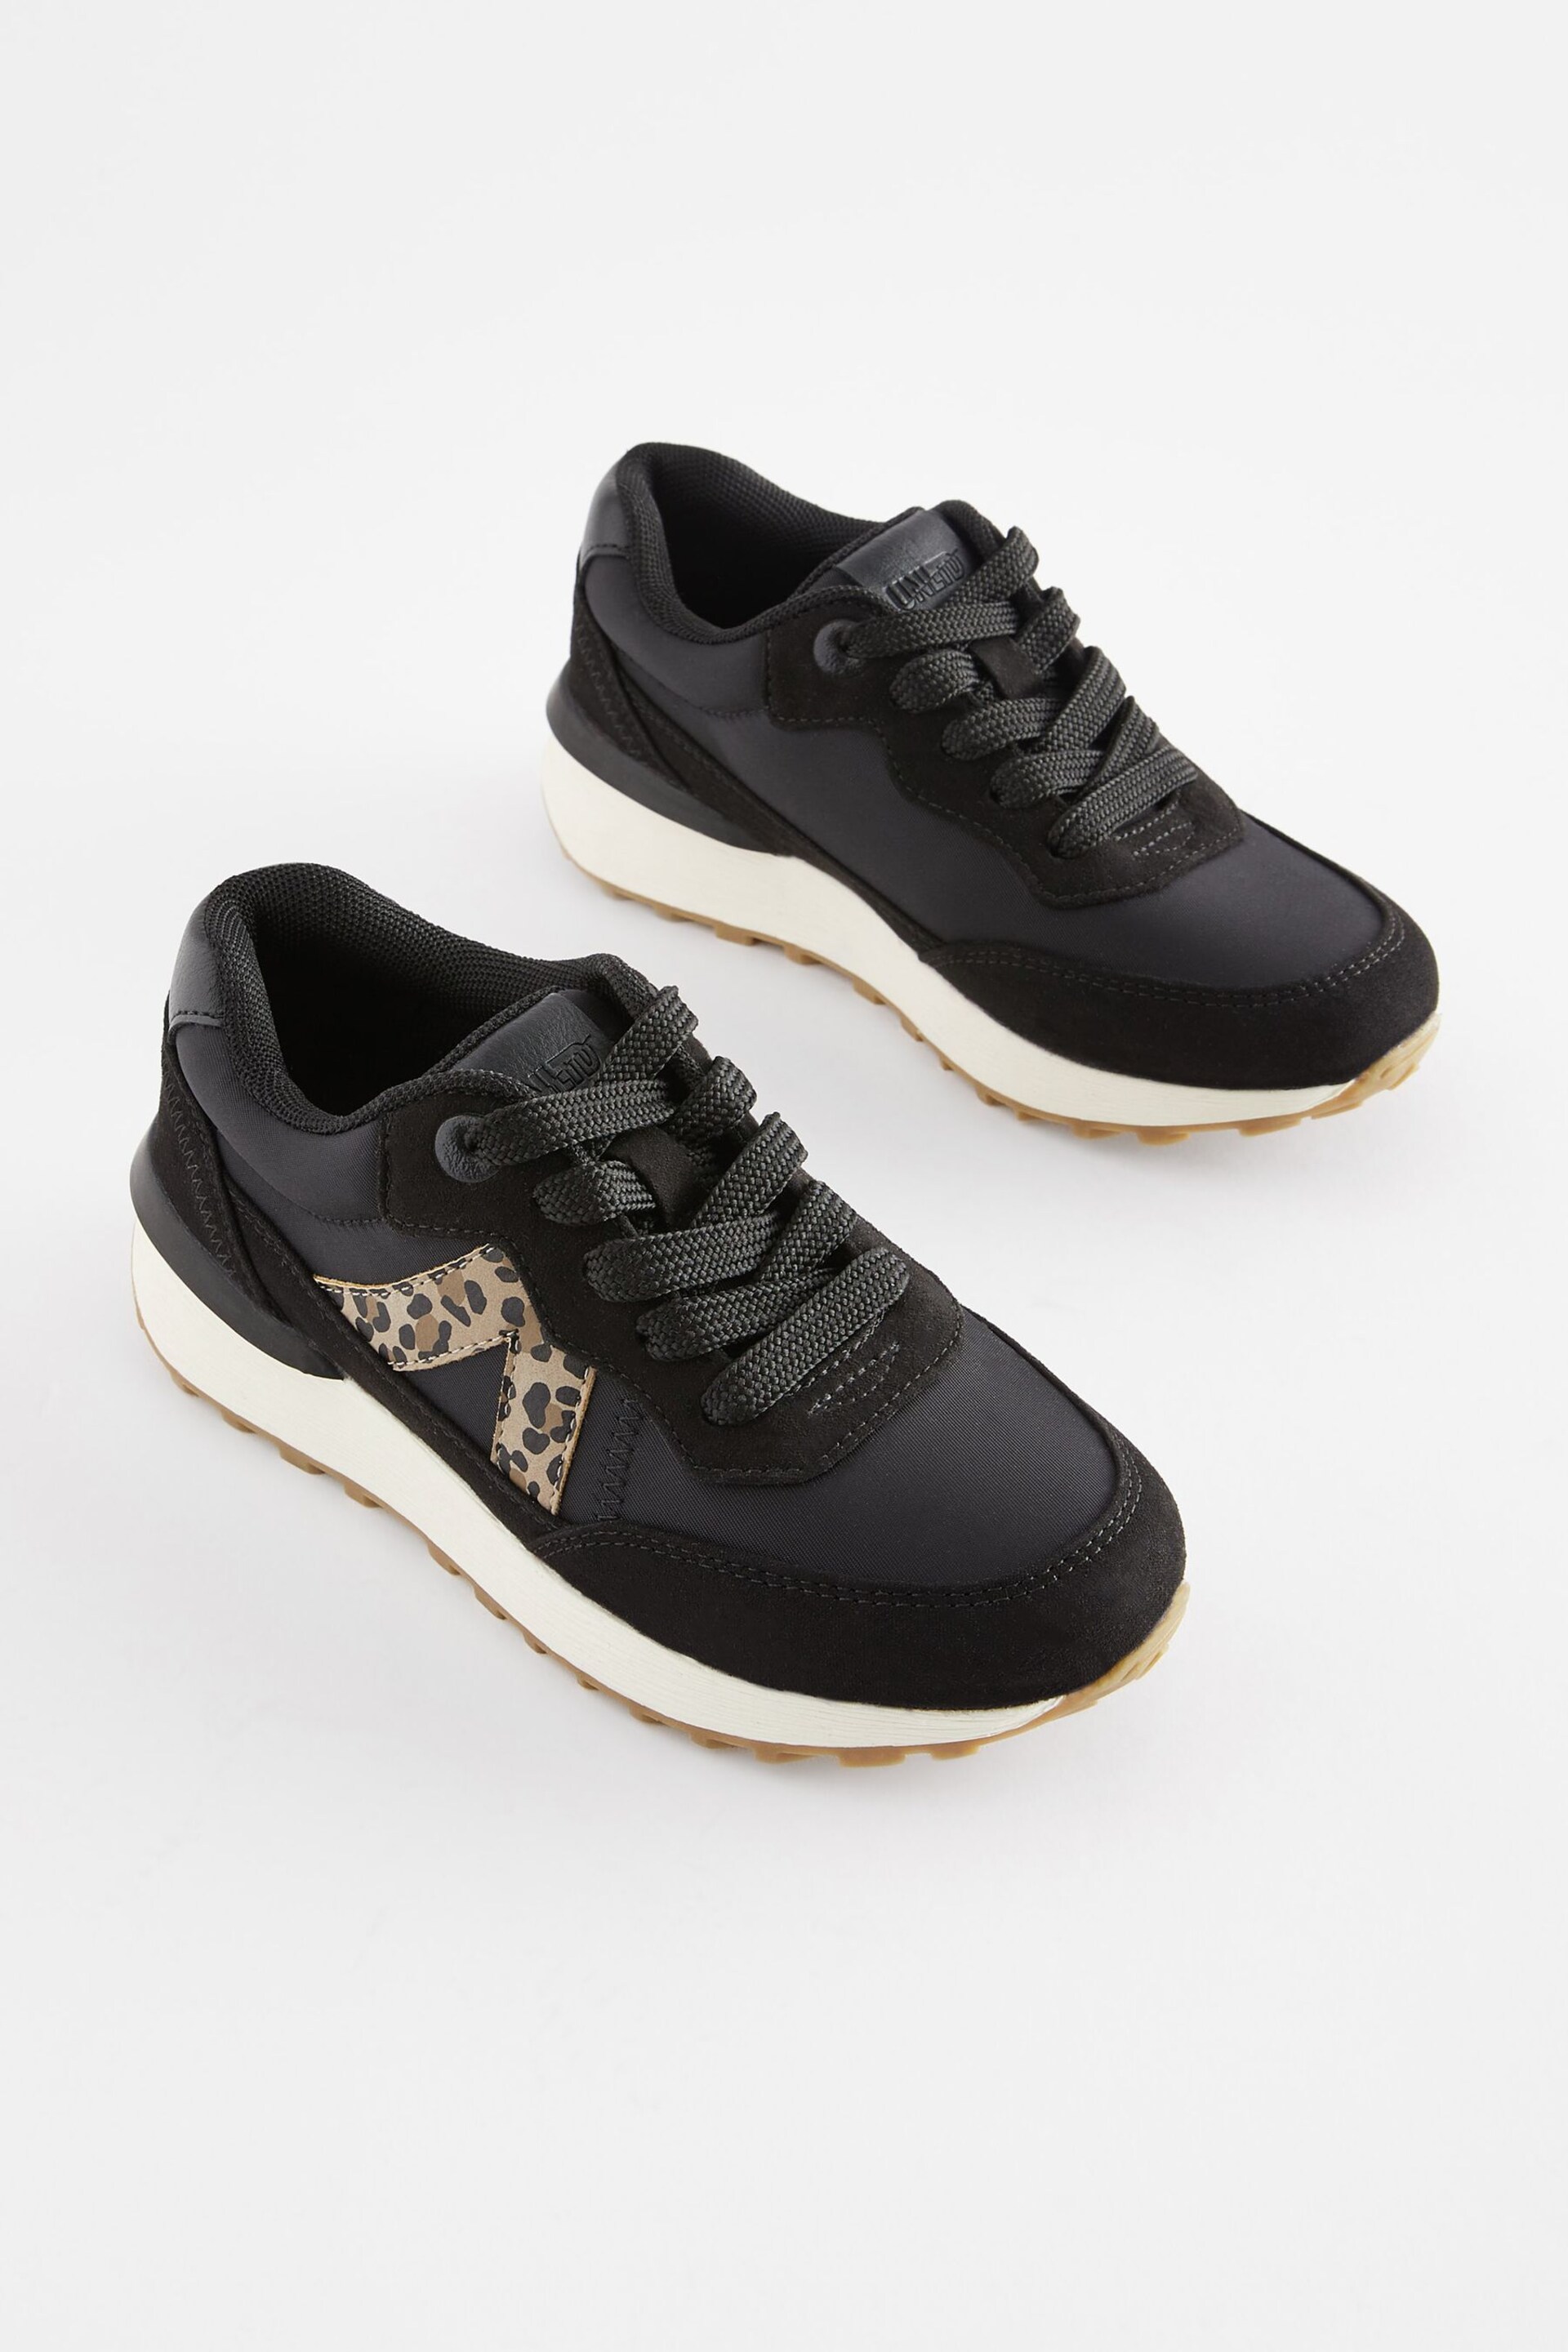 Black Animal Print Lace-Up Chunky Trainers - Image 1 of 5